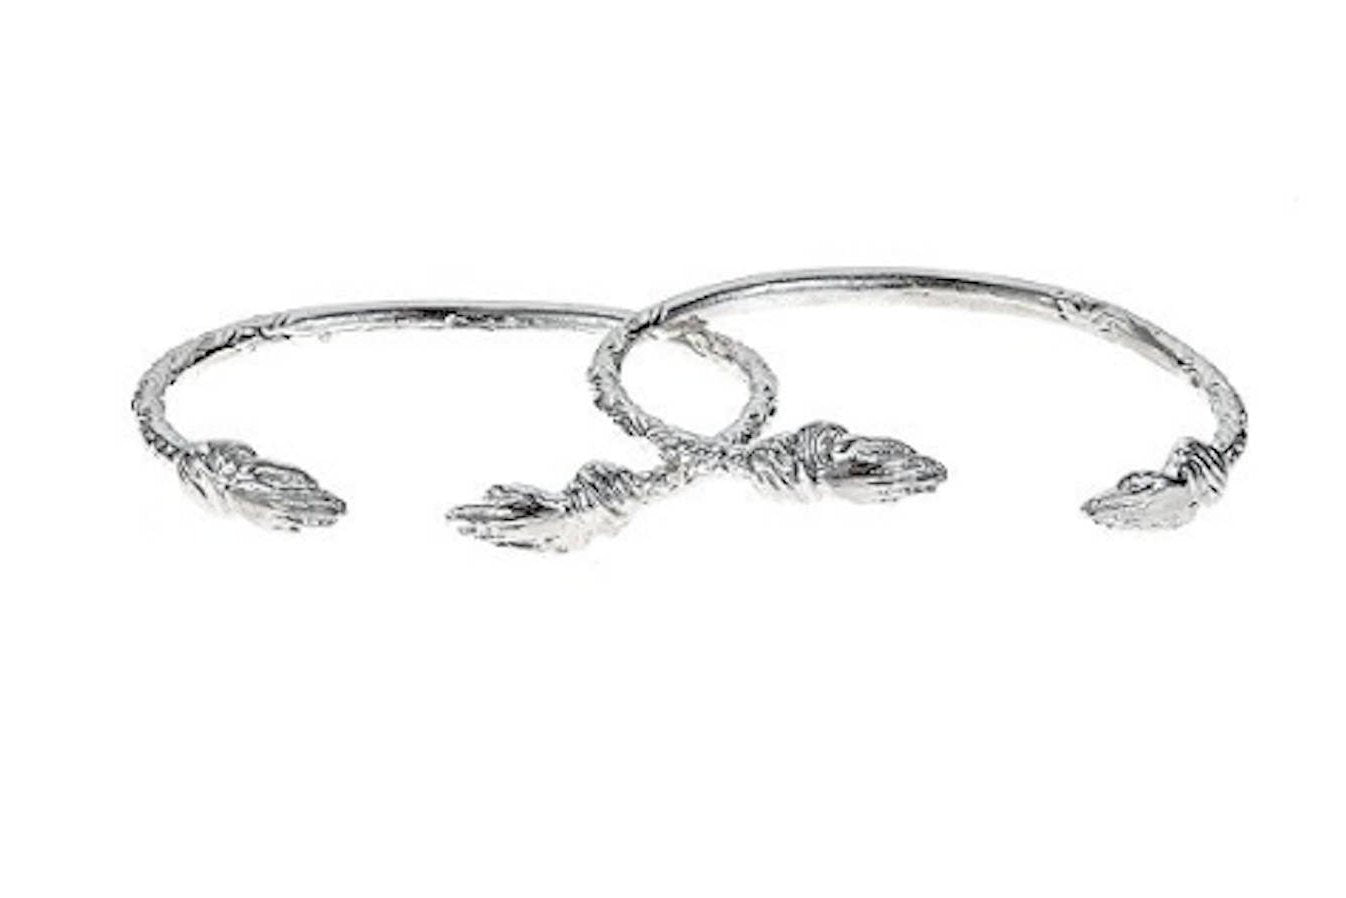 Praying Hands Ends West Indian Bangles .925 Sterling Silver 75.0 Grams (Pair) (MADE IN USA) - Betterjewelry